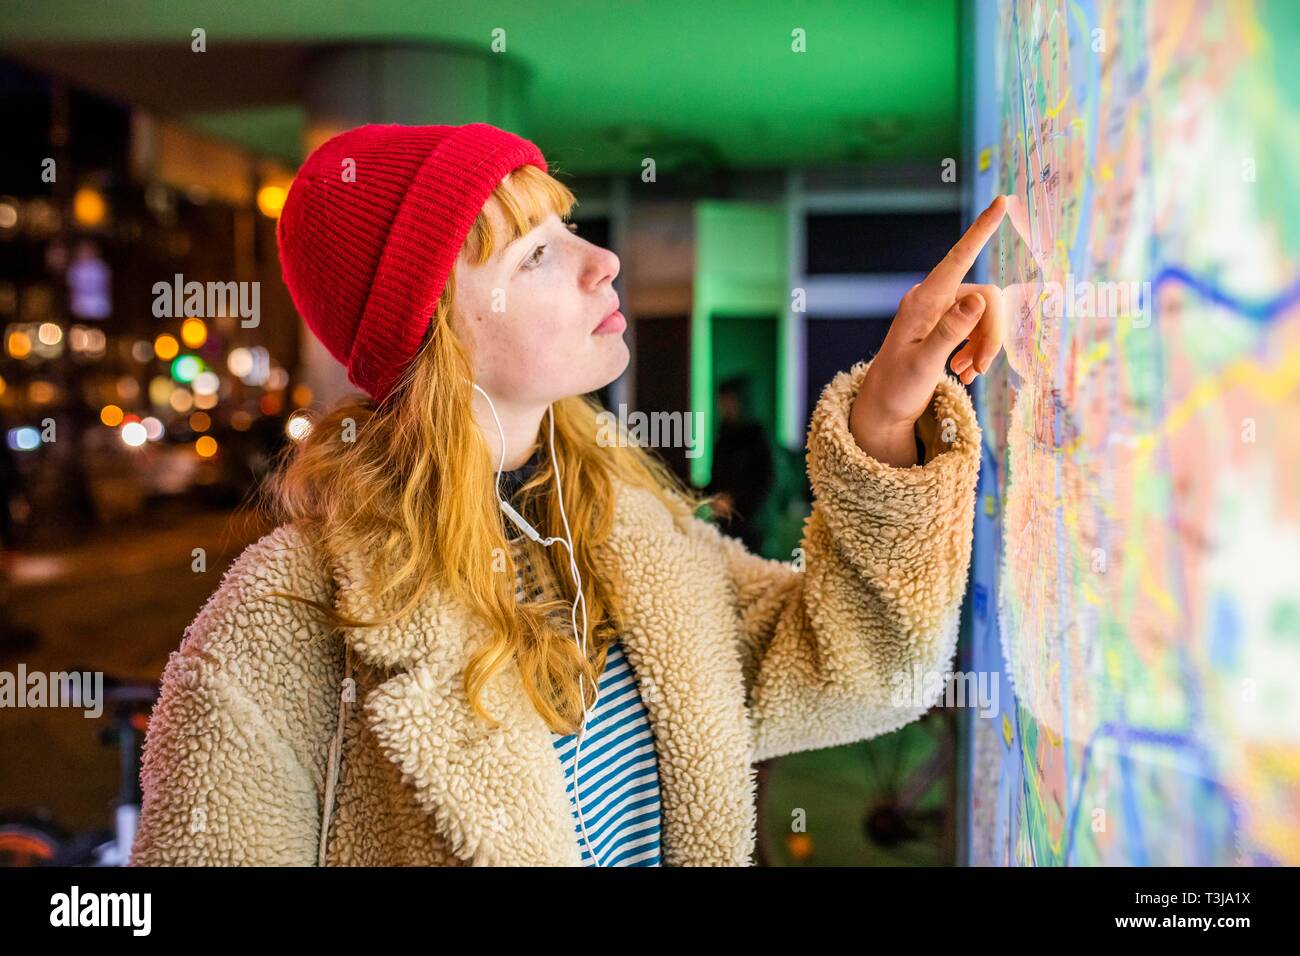 Girl, teenager, with a red beanie and headphones in her ear standing in front of a city map at night, Cologne, North Rhine-Westphalia, Germany Stock Photo